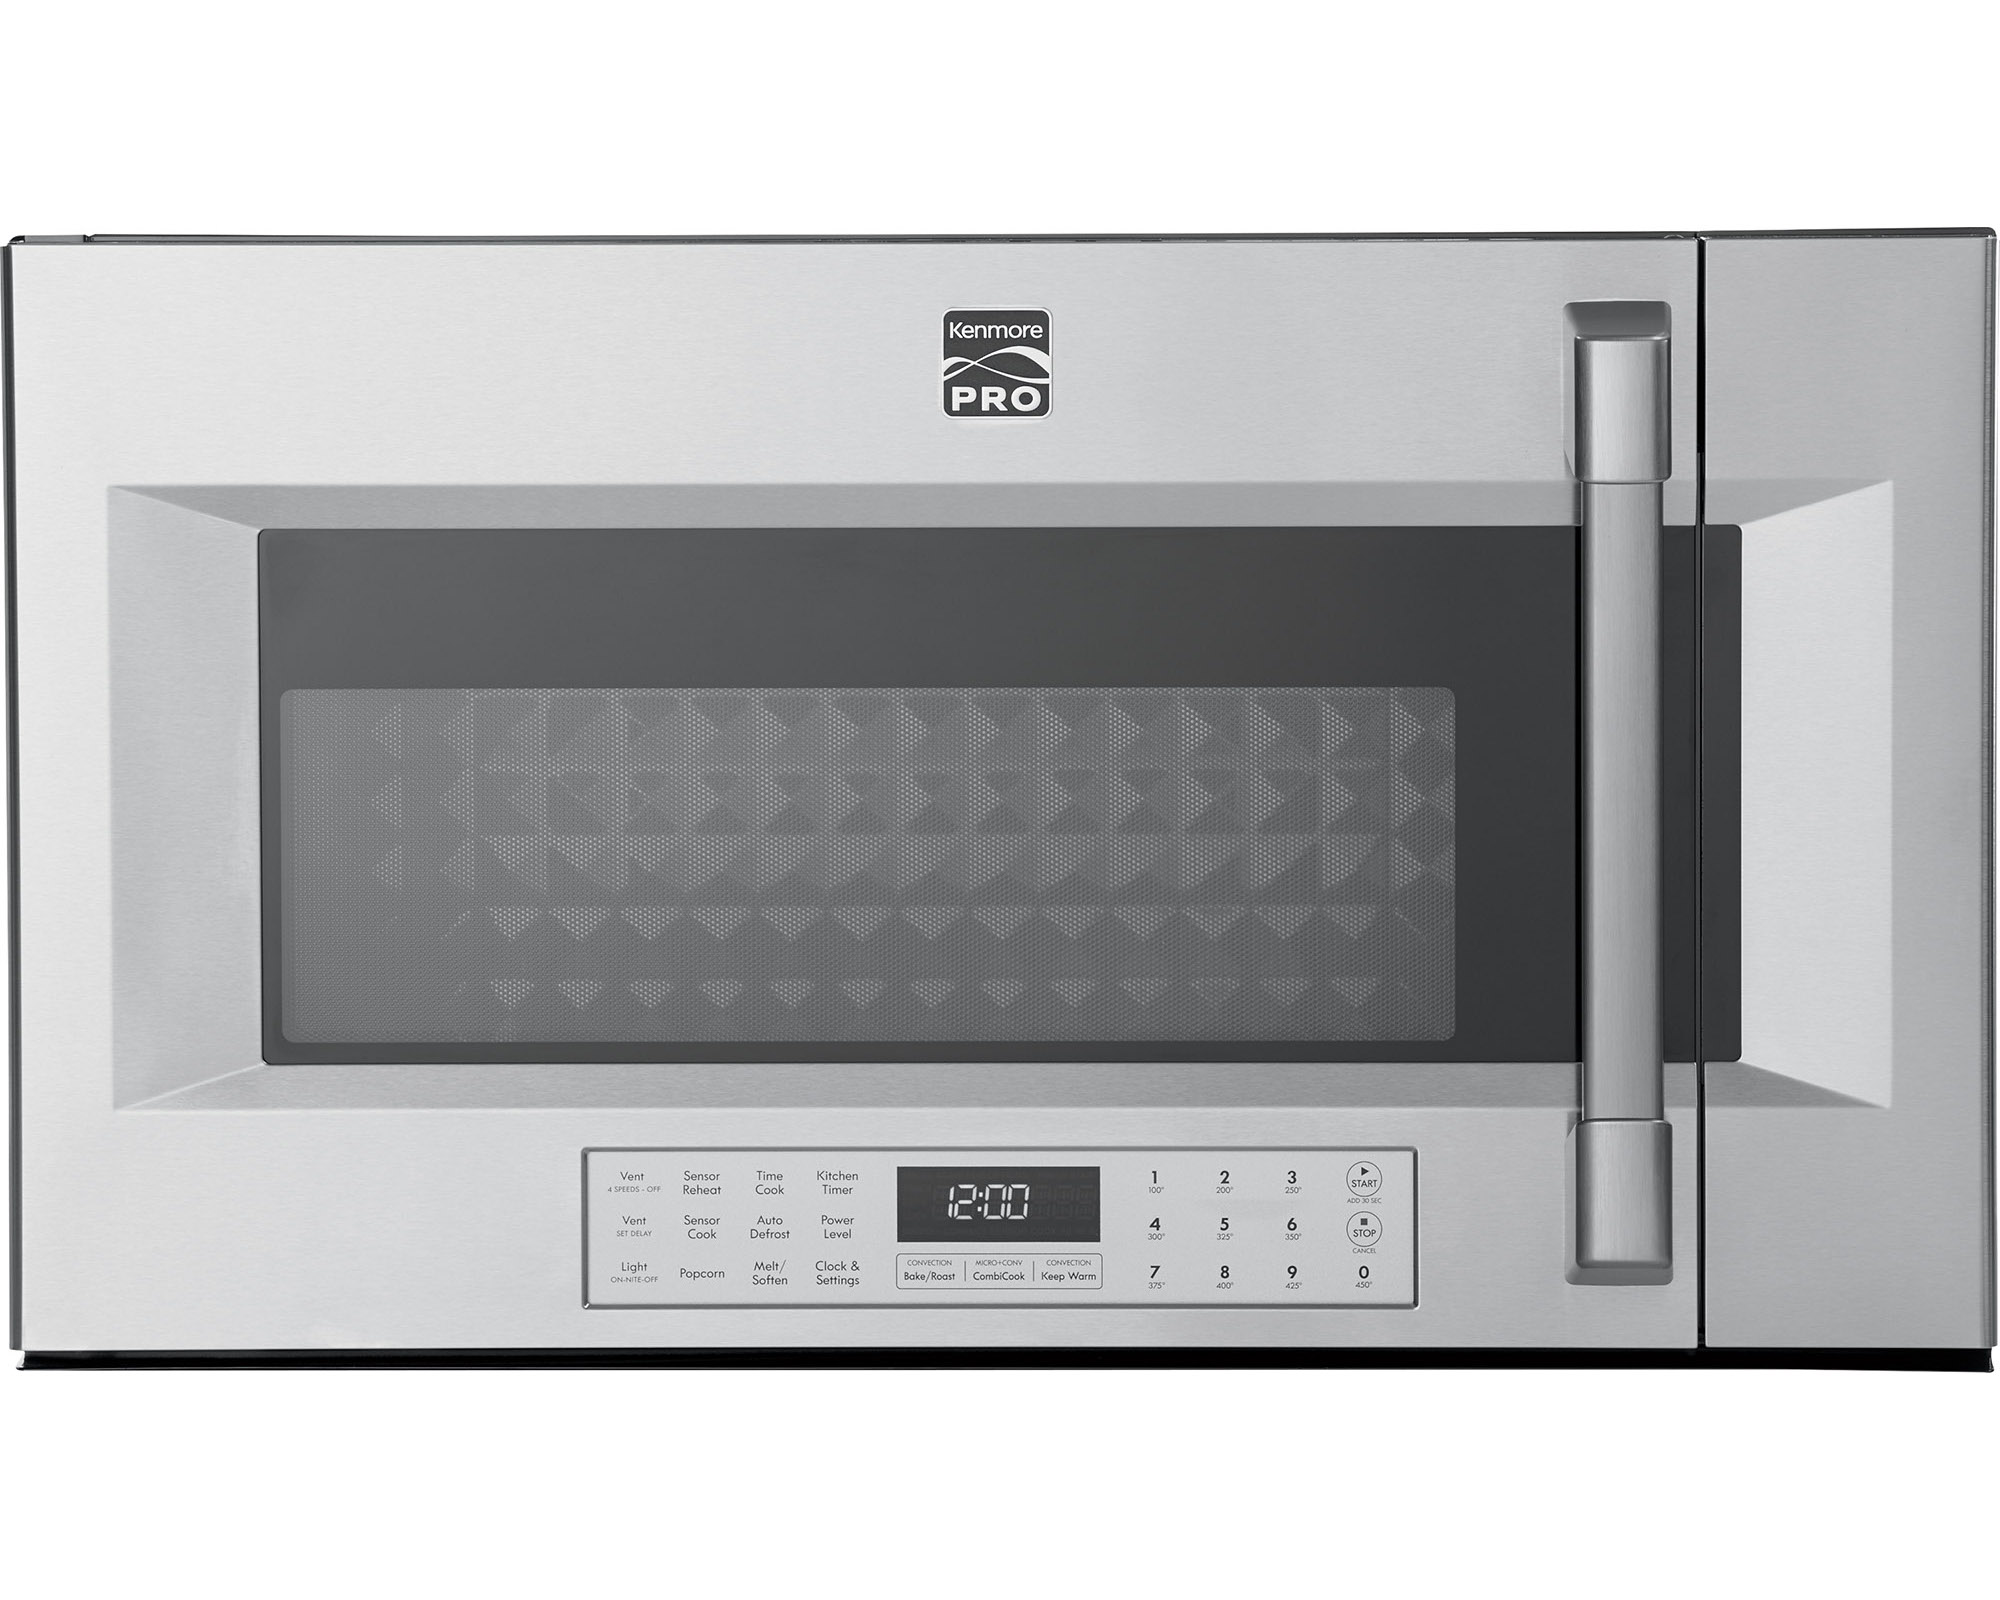 Kenmore Pro 89393 1.8 cu. ft. Over-the-Range Convection Microwave